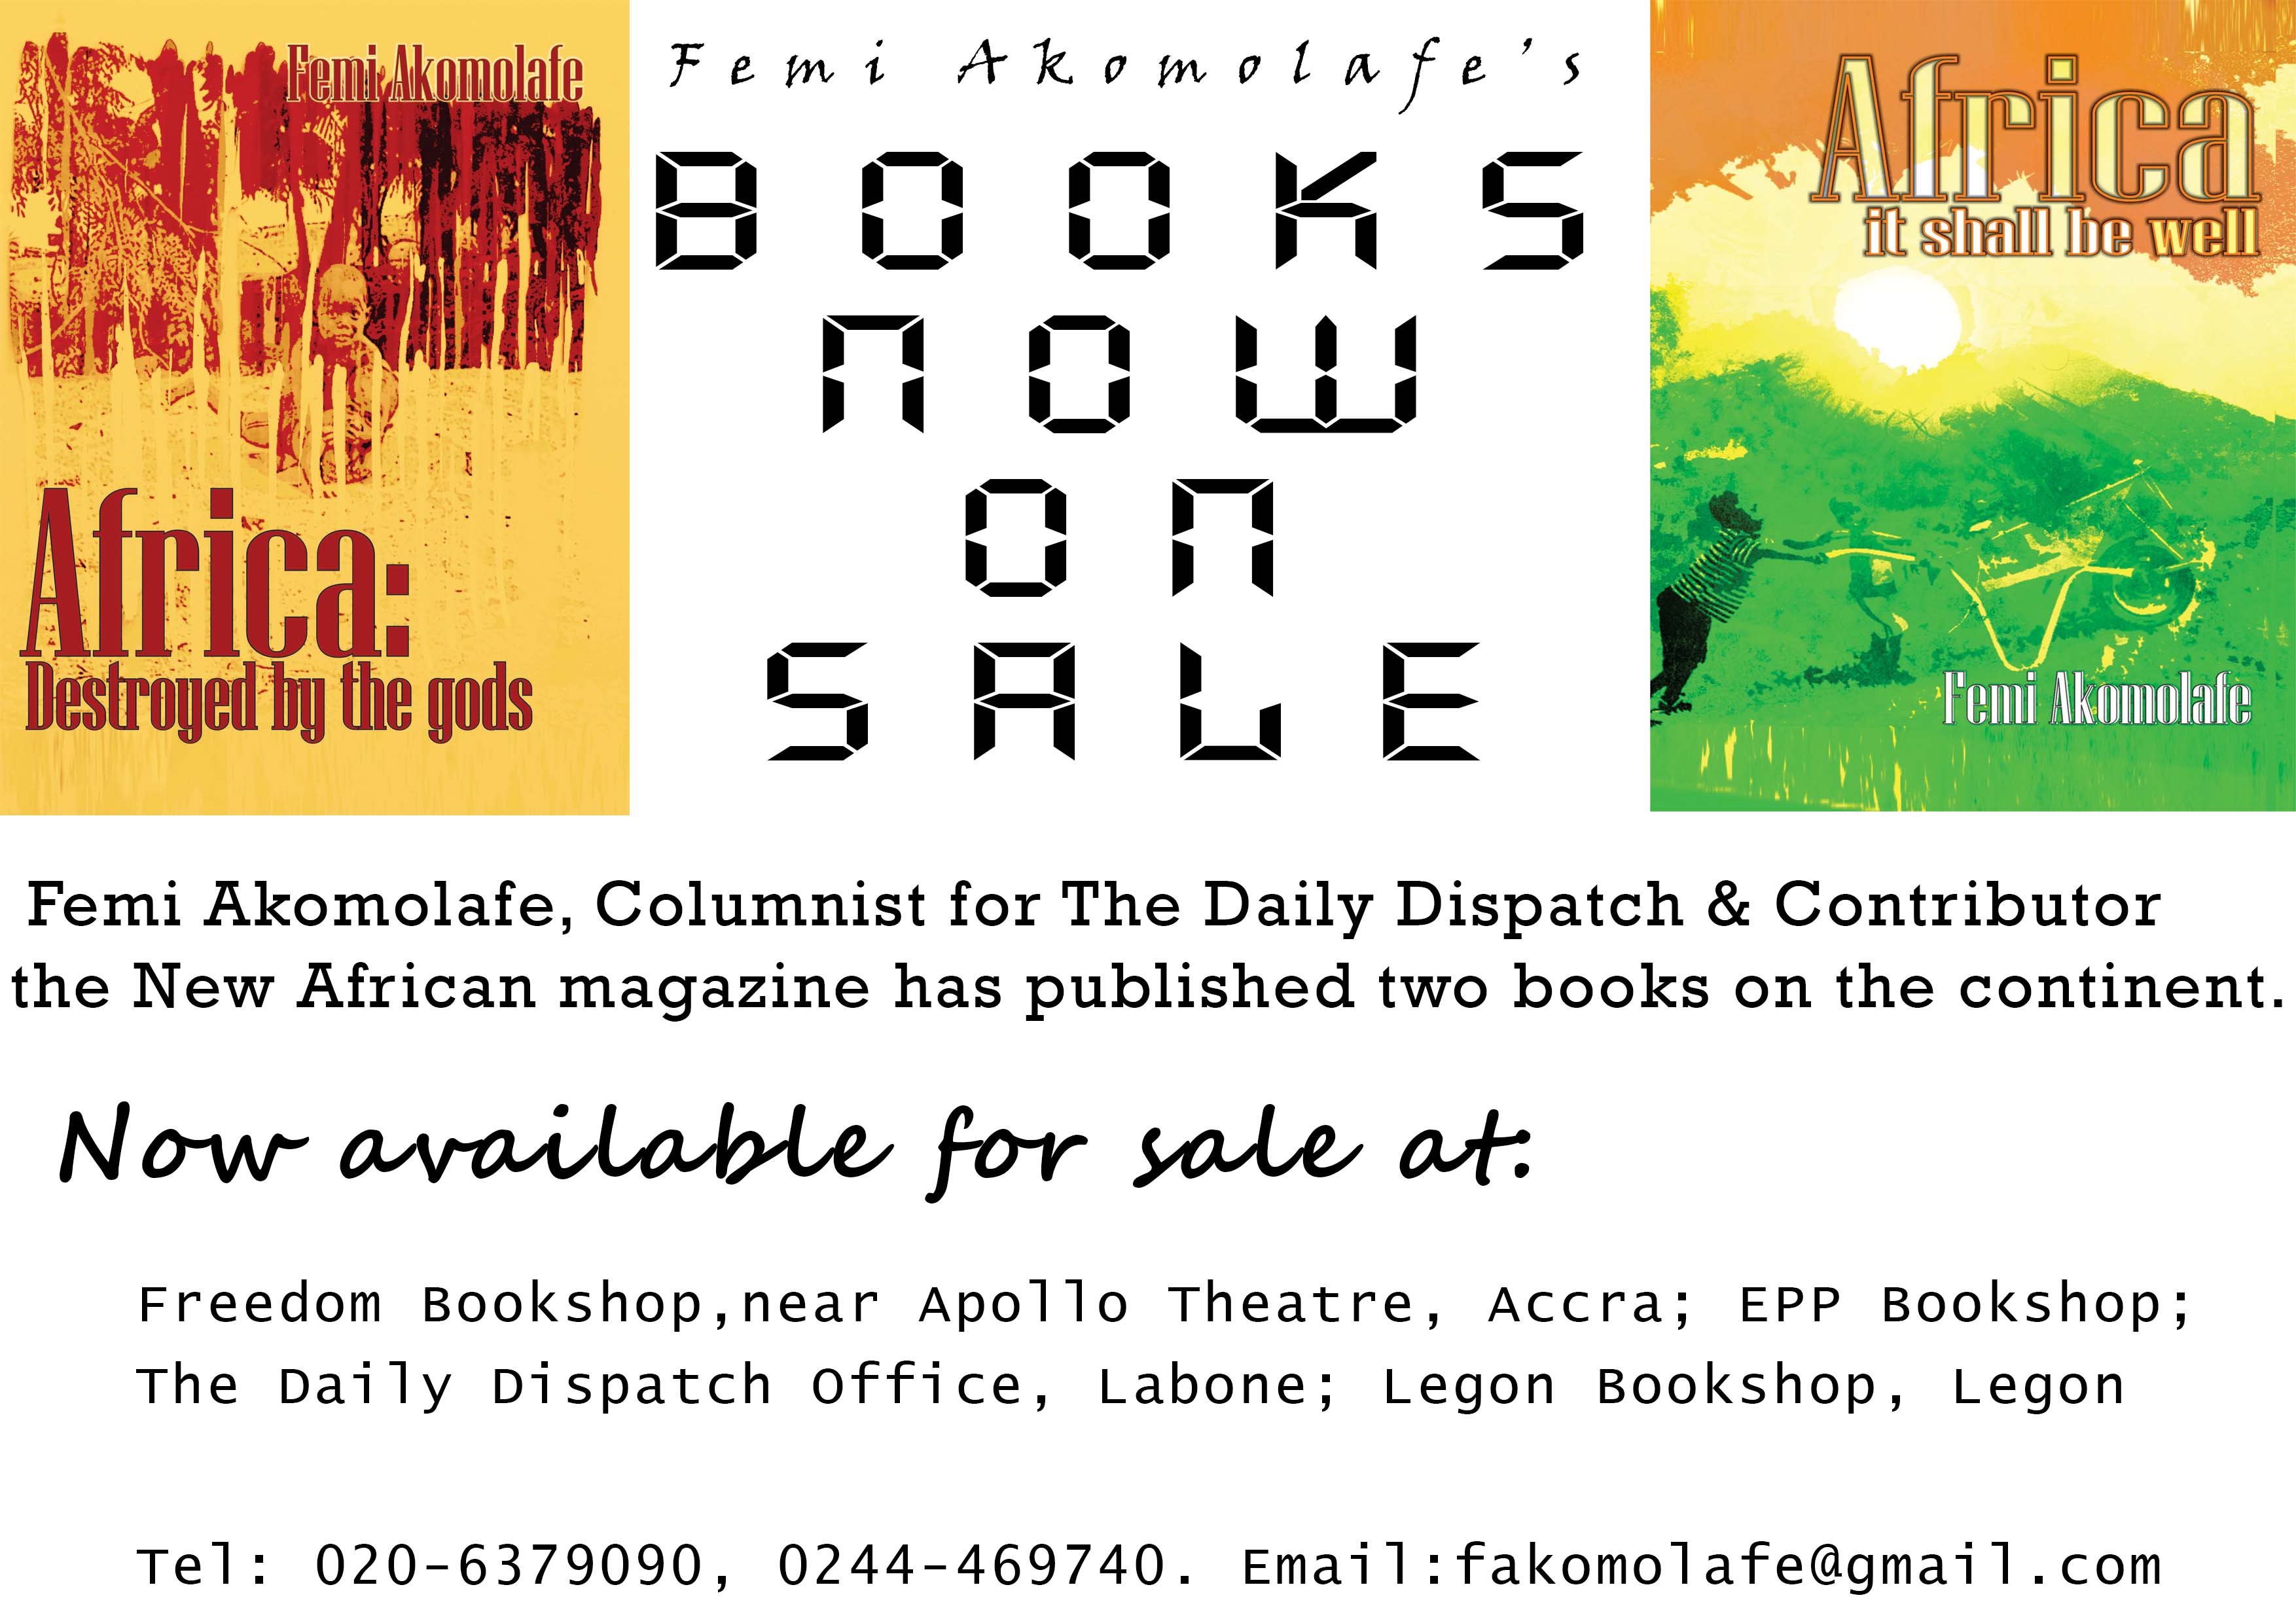 Africa: destroyed by the gods – Introduction in PDF